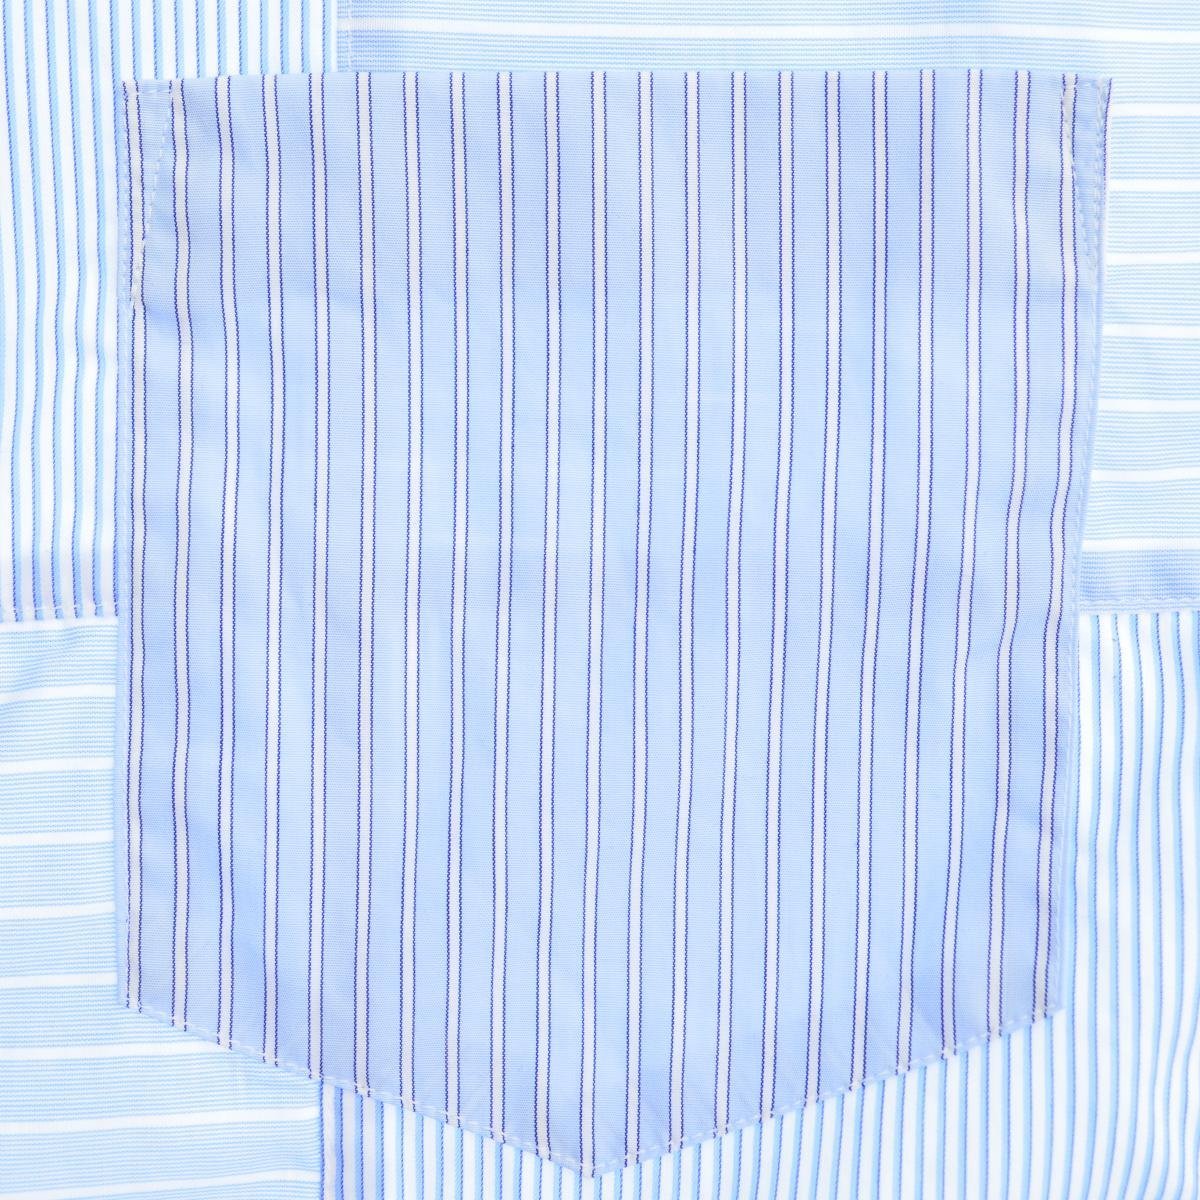 [M]COMME des GARCONS HOMME / Comme des Garcons Homme 23SS AD2022 HK-B020 cotton stripe / check MIX product . patchwork short sleeves shirt 